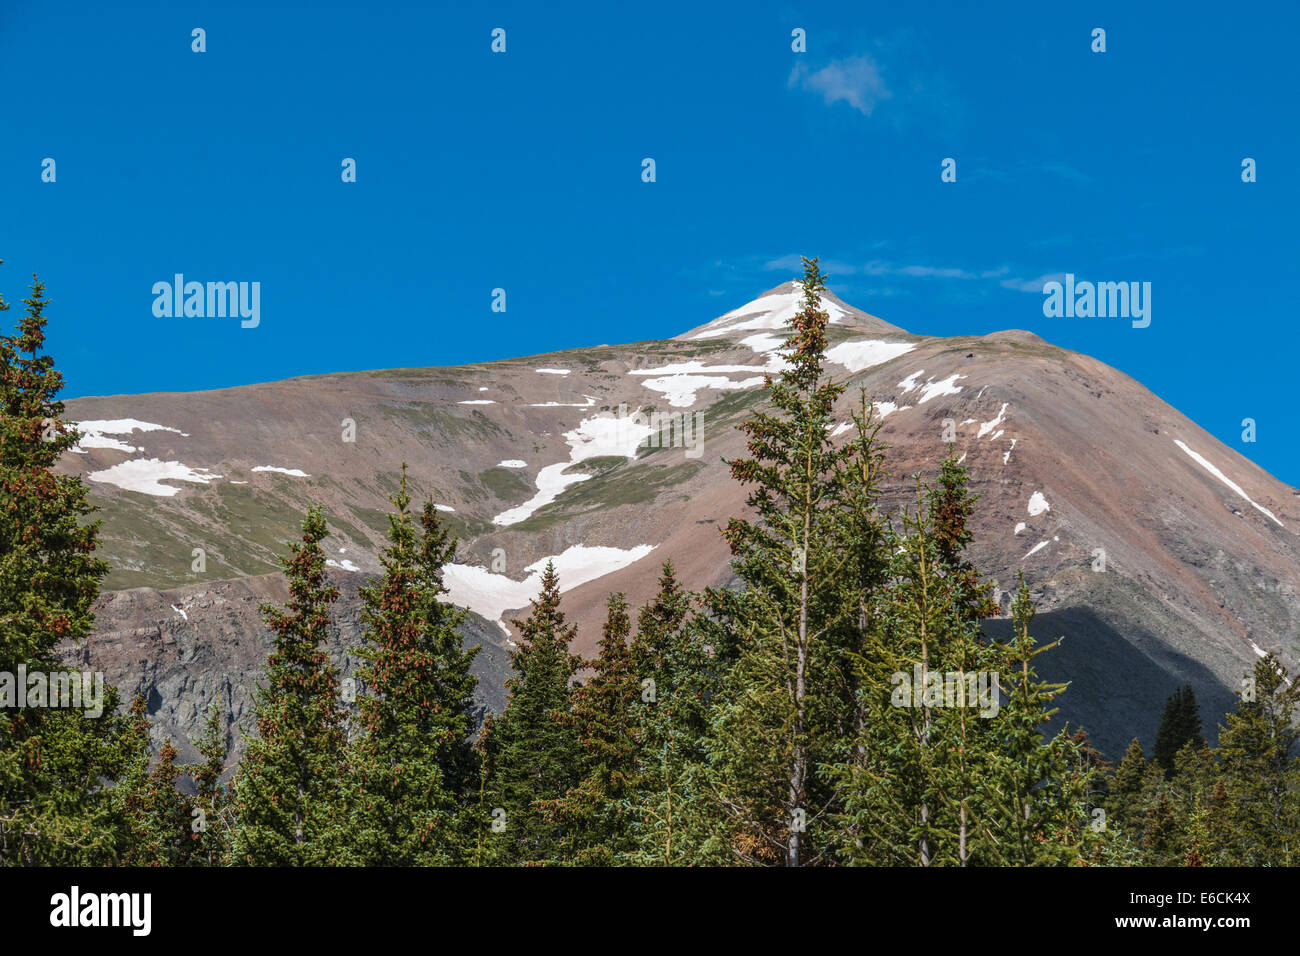 Quandary Peak viewed from Hoosier Pass, a high mountain pass in the Rocky Mountains in Colorado. Stock Photo